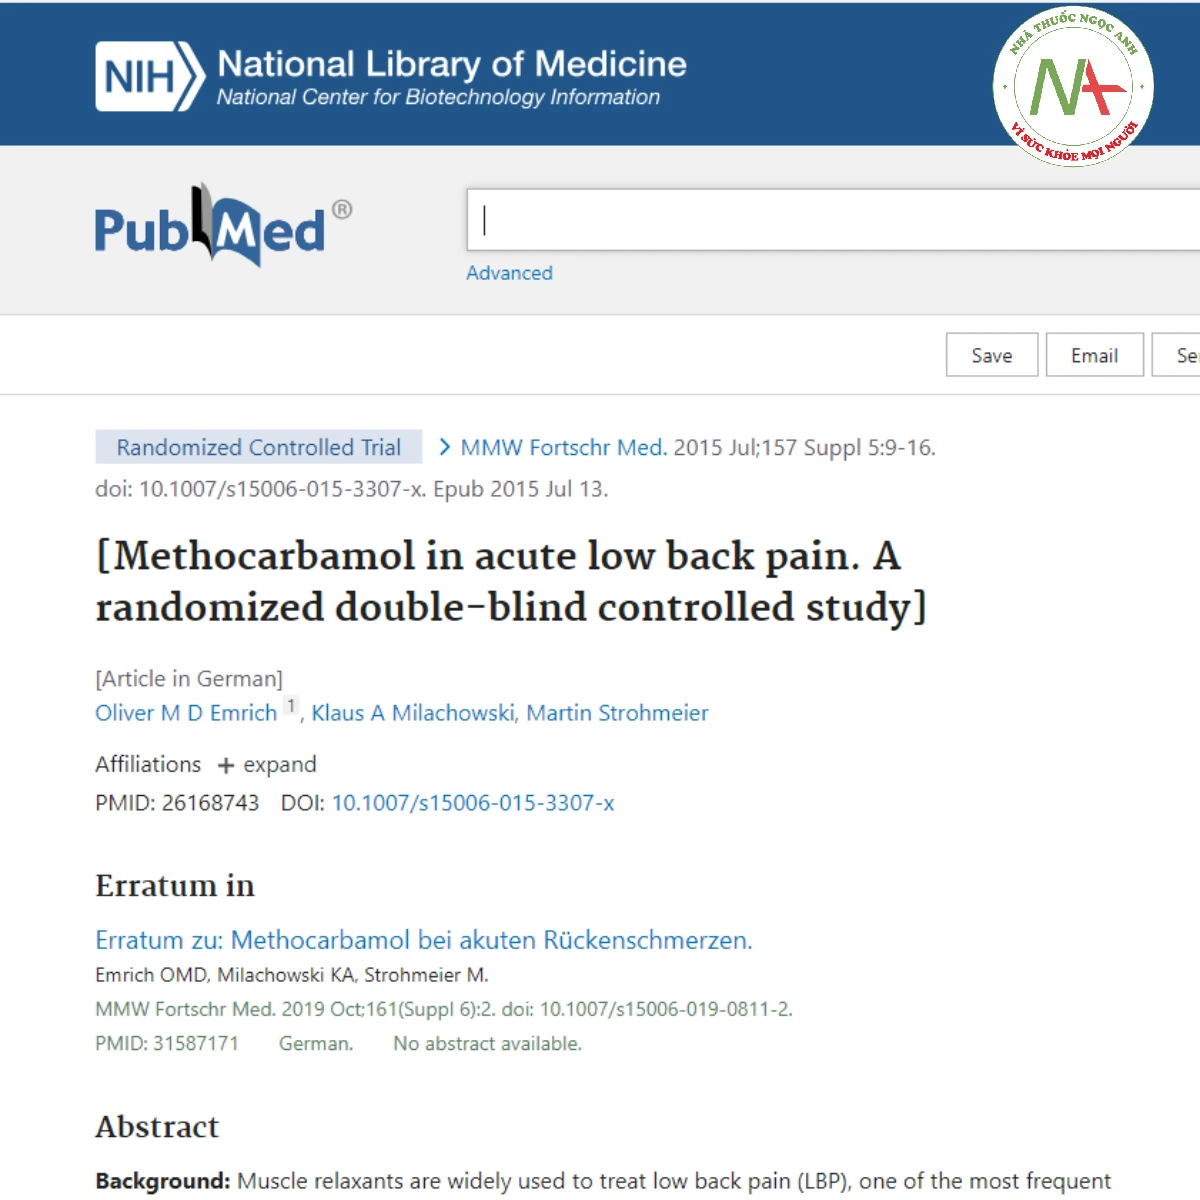 Methocarbamol in acute low back pain. A randomized double-blind controlled study